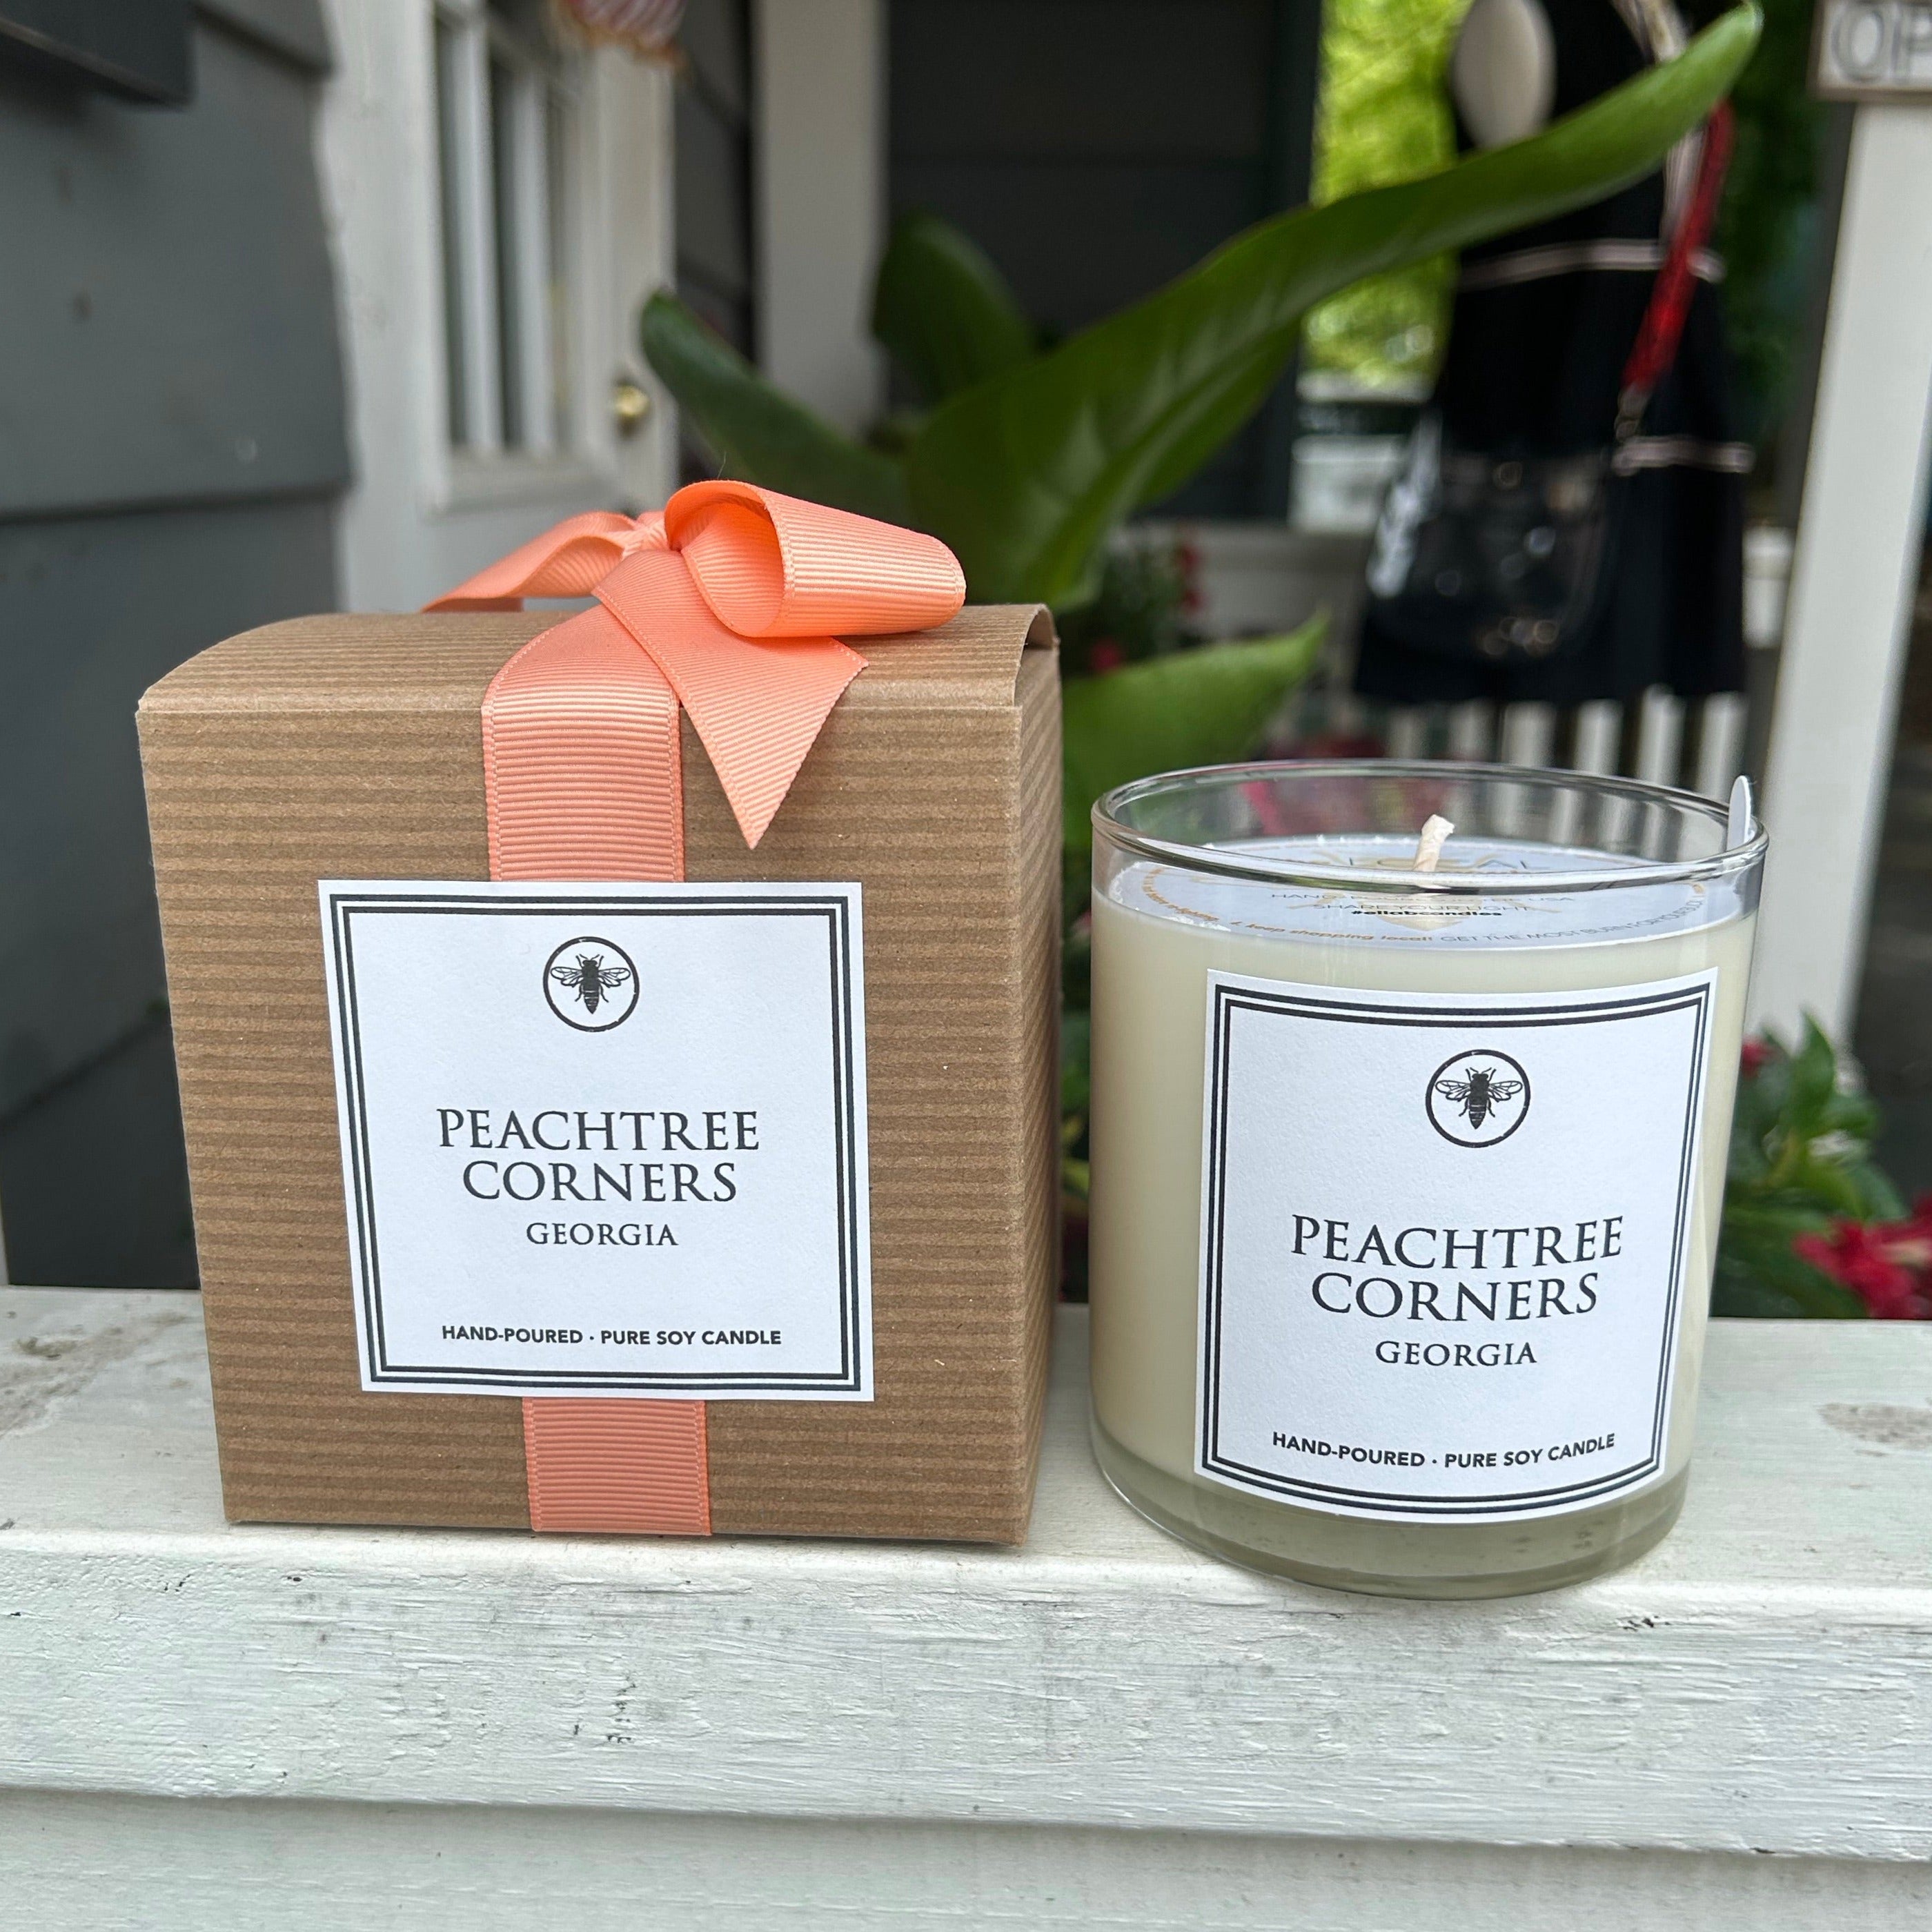 Theme Hand-Poured Soy Candles